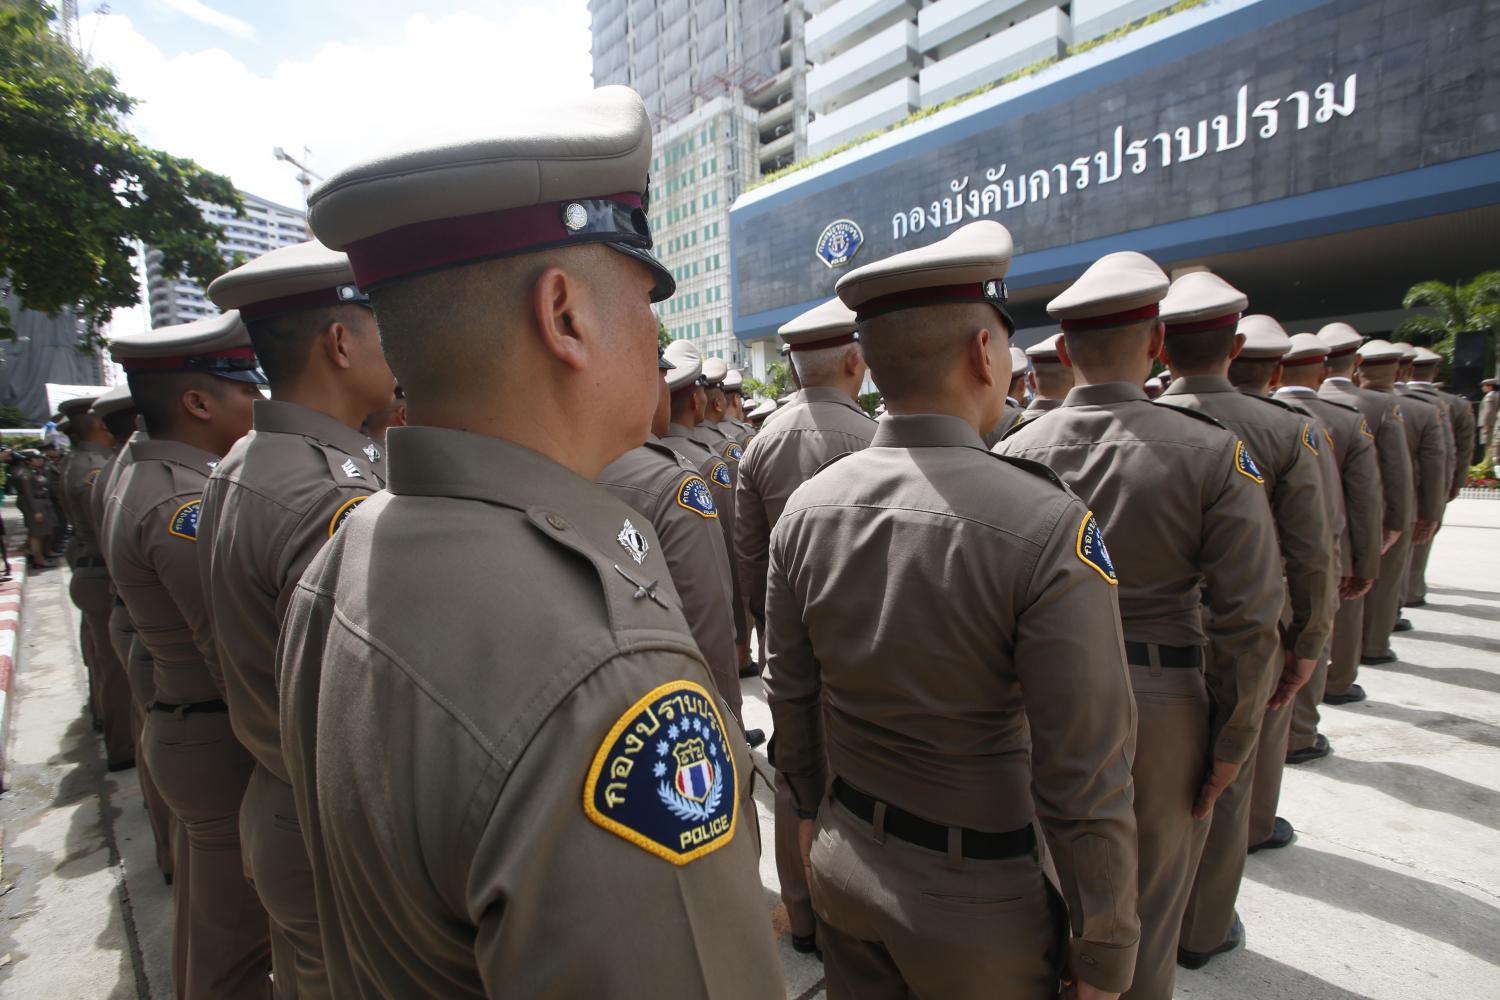 Eighty-Six Percent of Thailand's 1,500 Police Stations Fail in Transparency